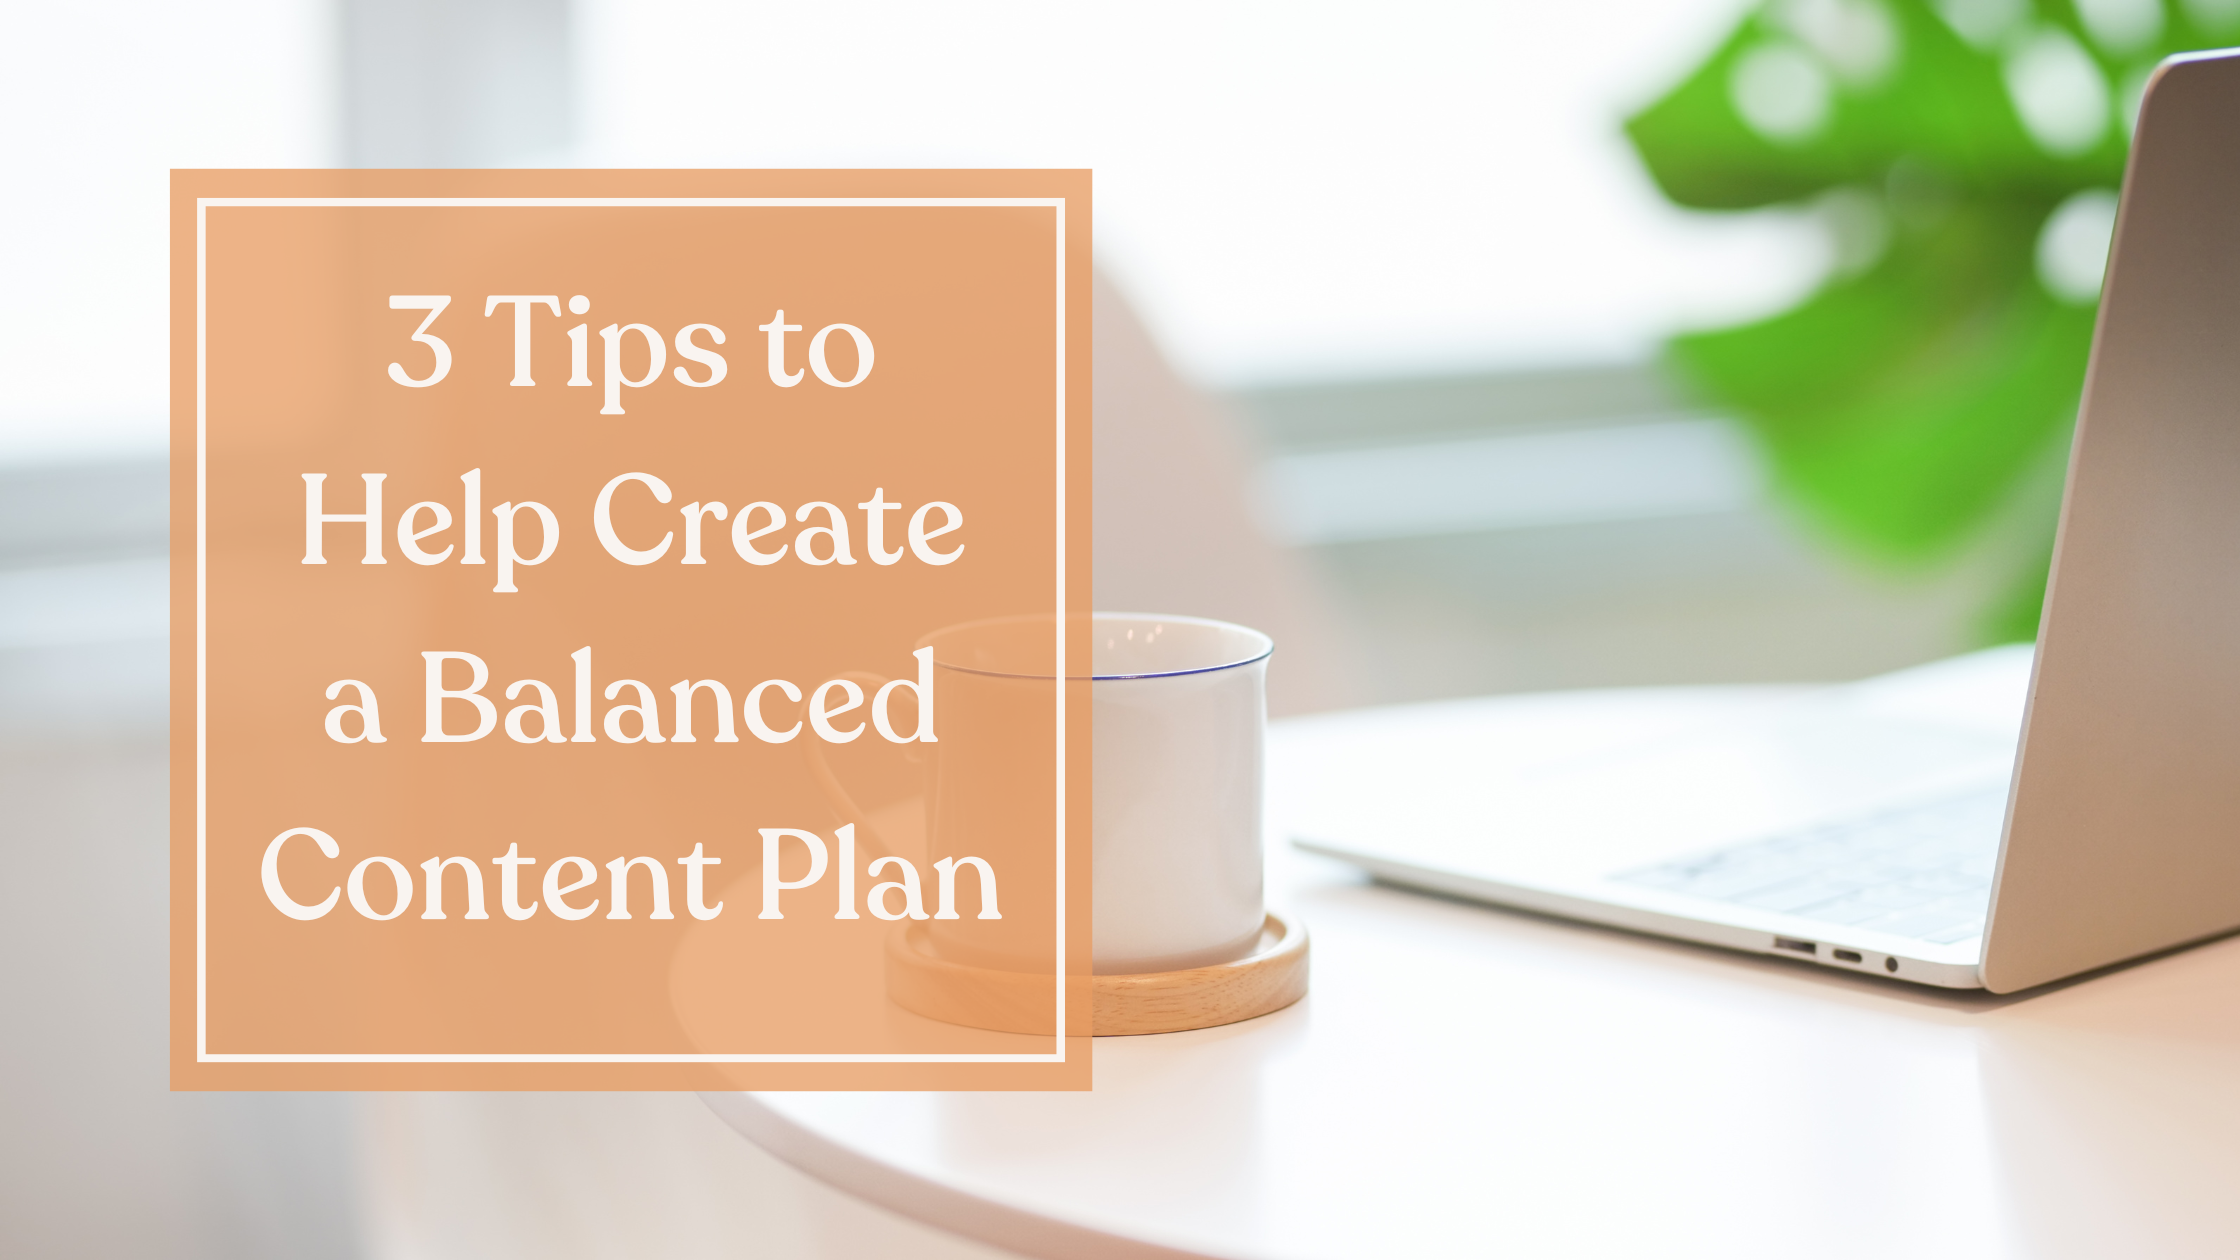 3 Tips to Help Create a Balanced Content Plan